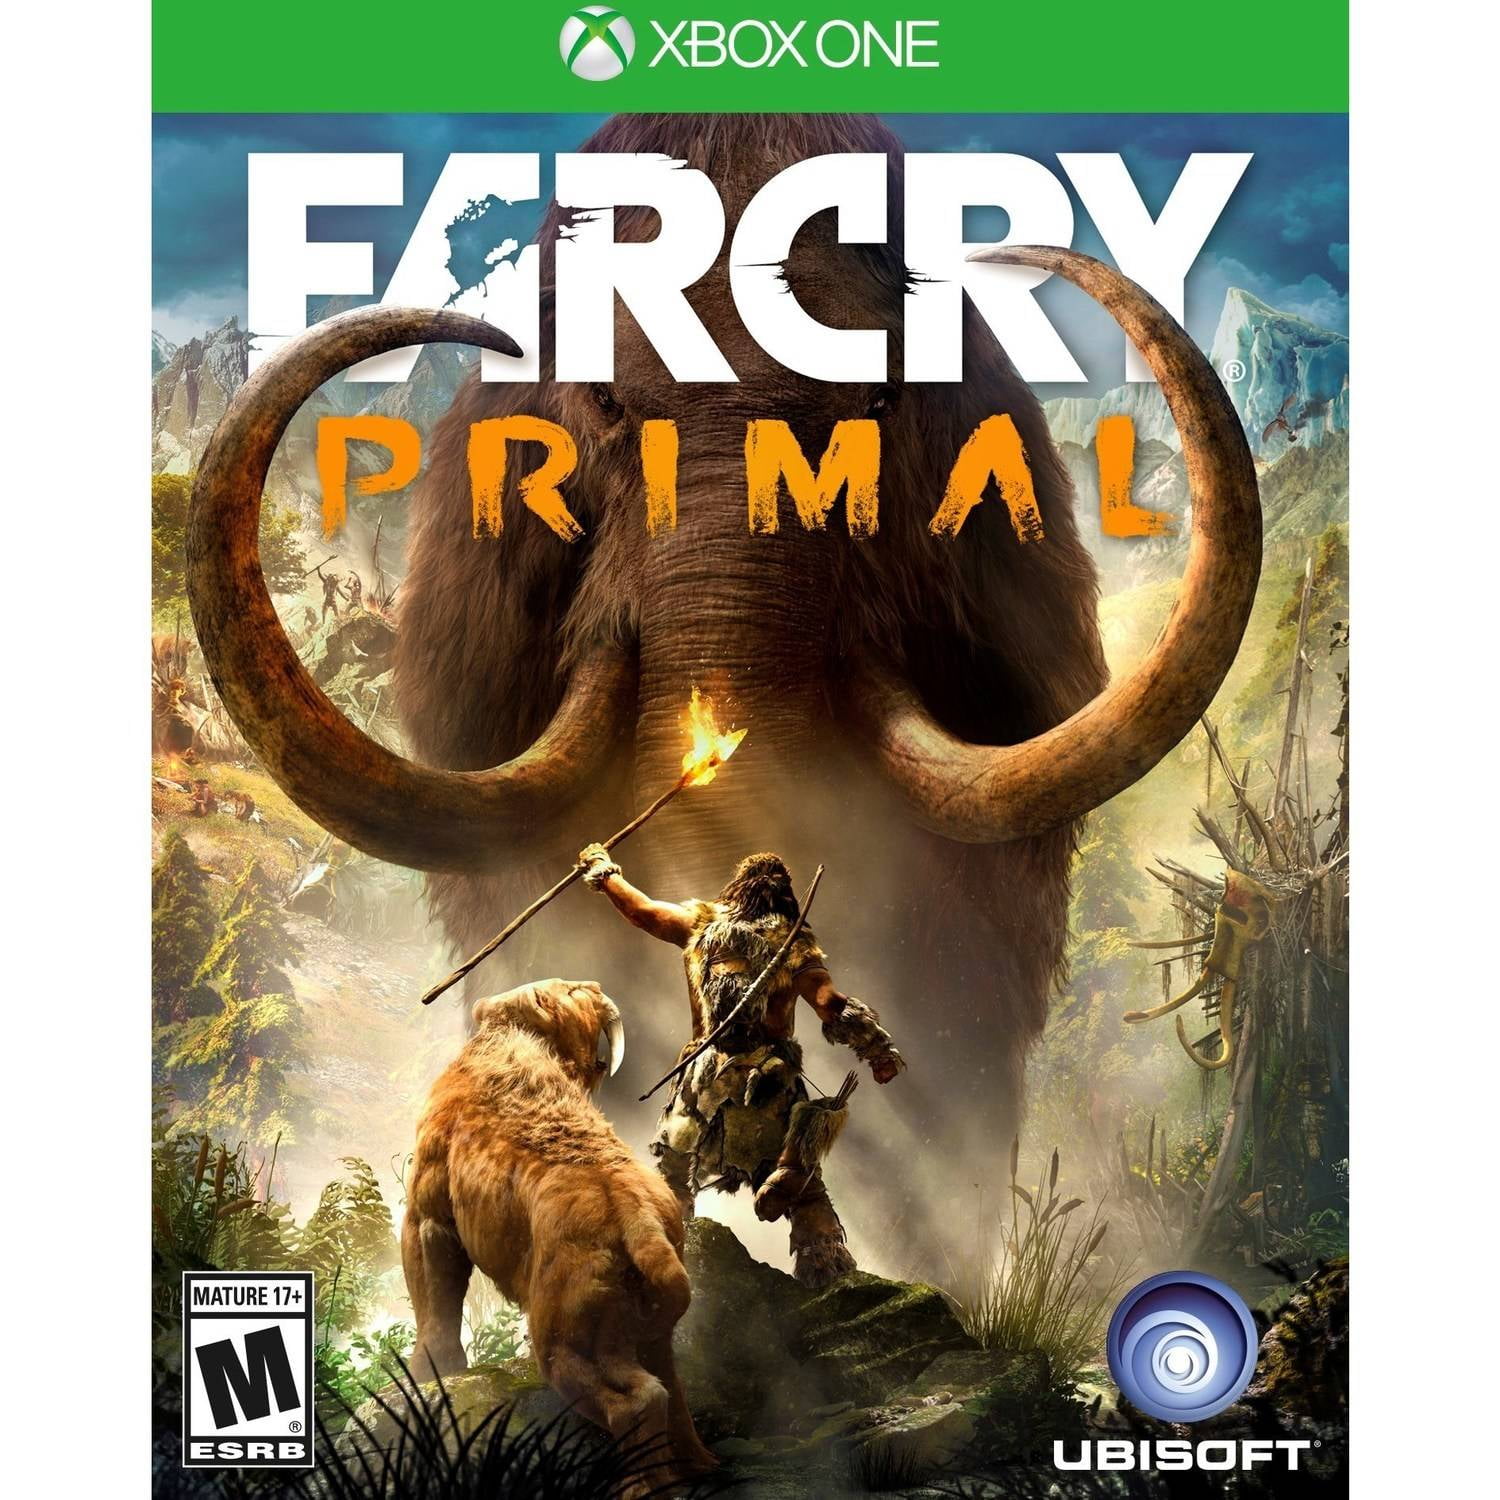  Far Cry 3 Classic Edition Xbox One - Xbox One : Video Games